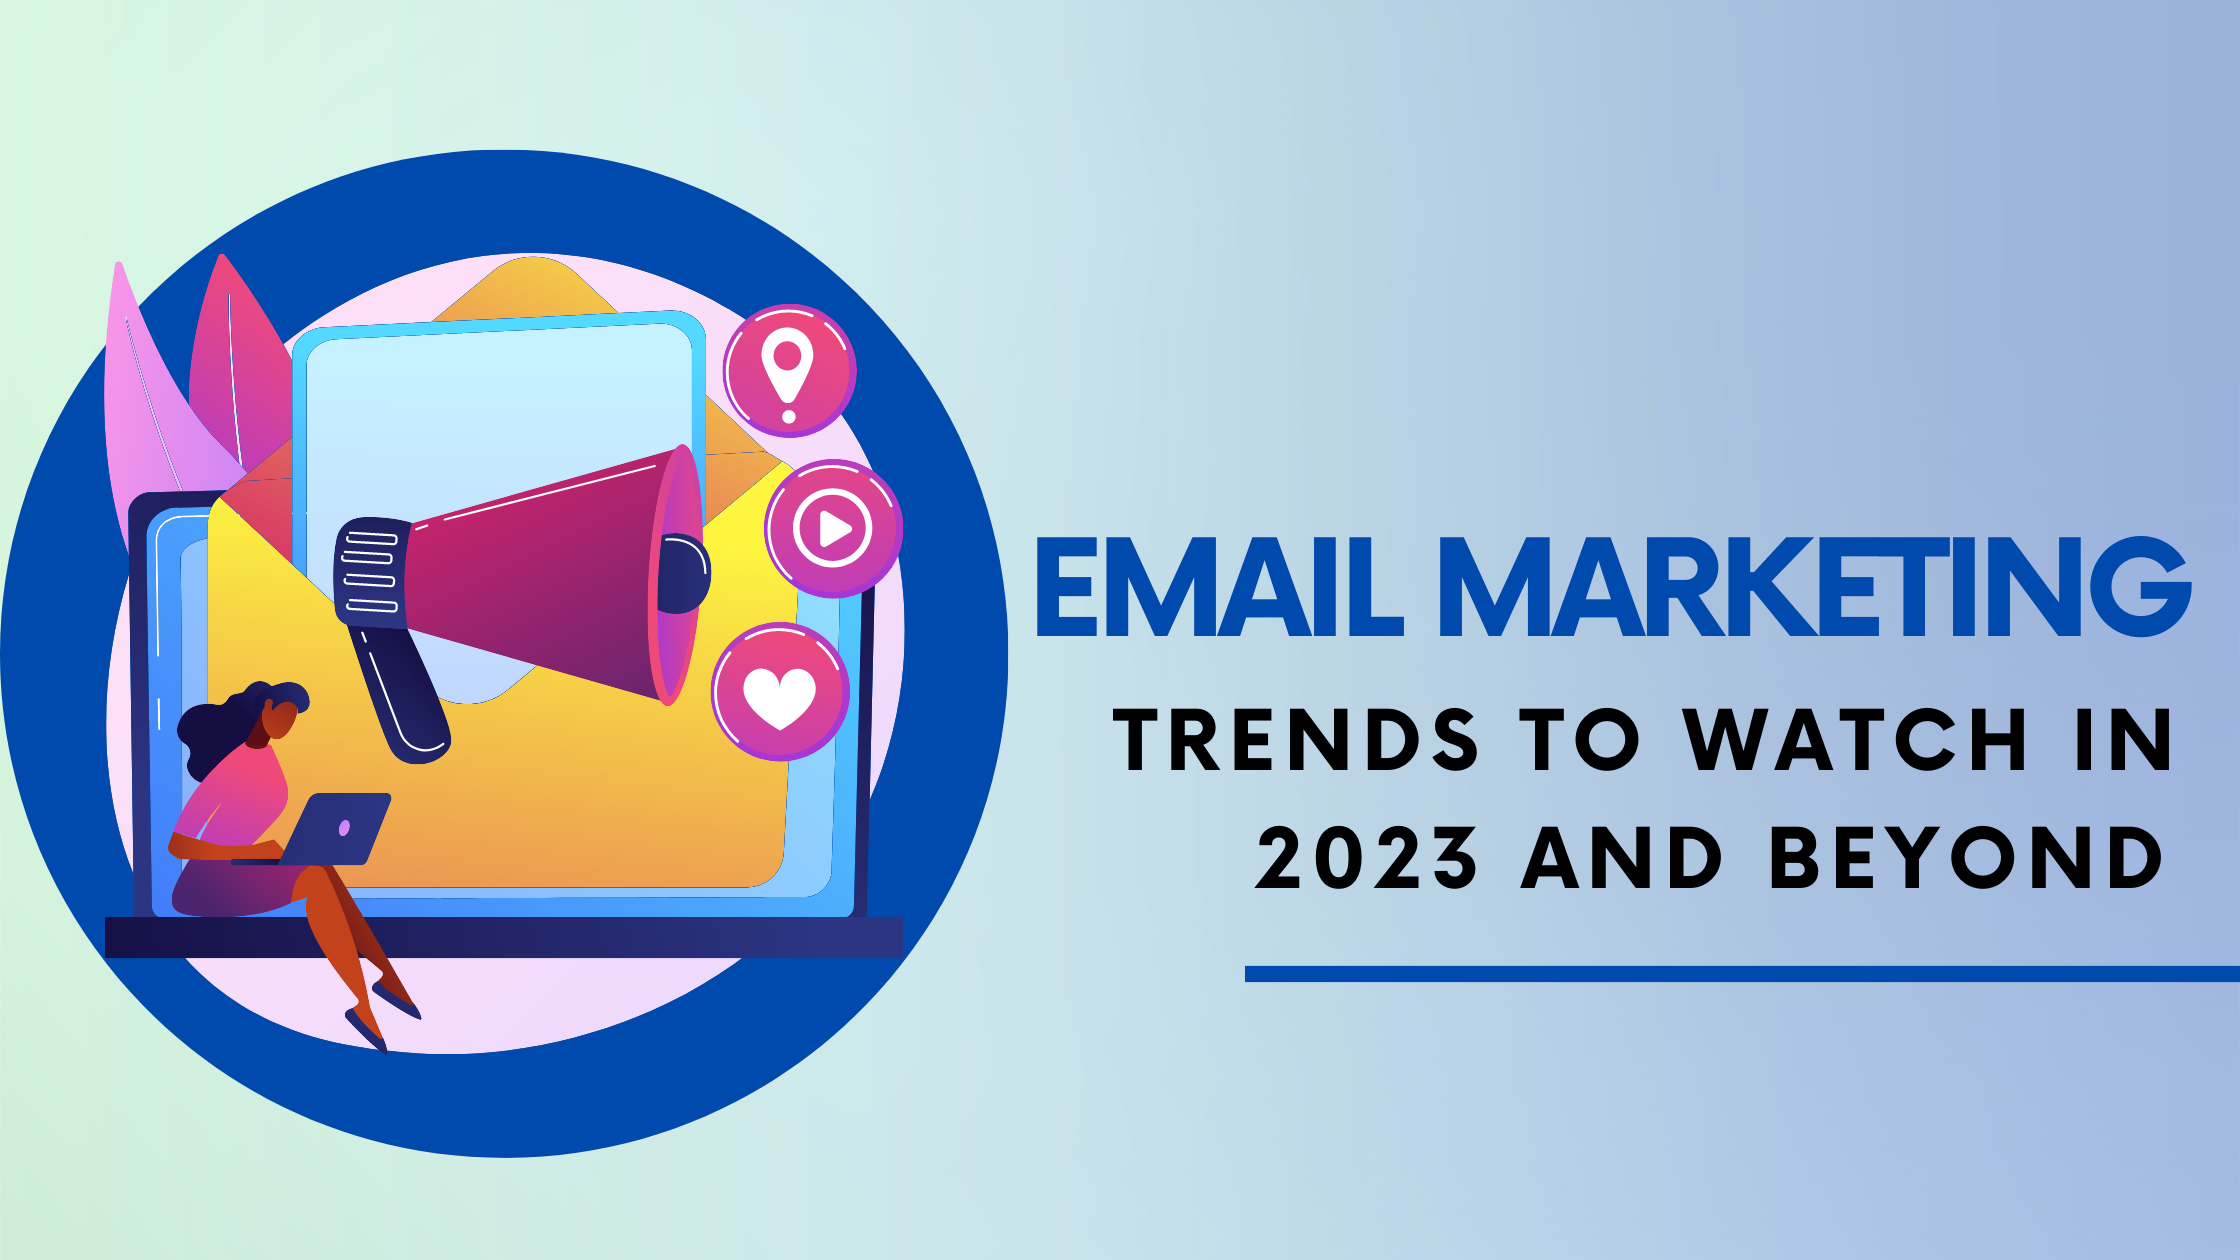  Email Marketing Trends to Watch in 2023 and Beyond